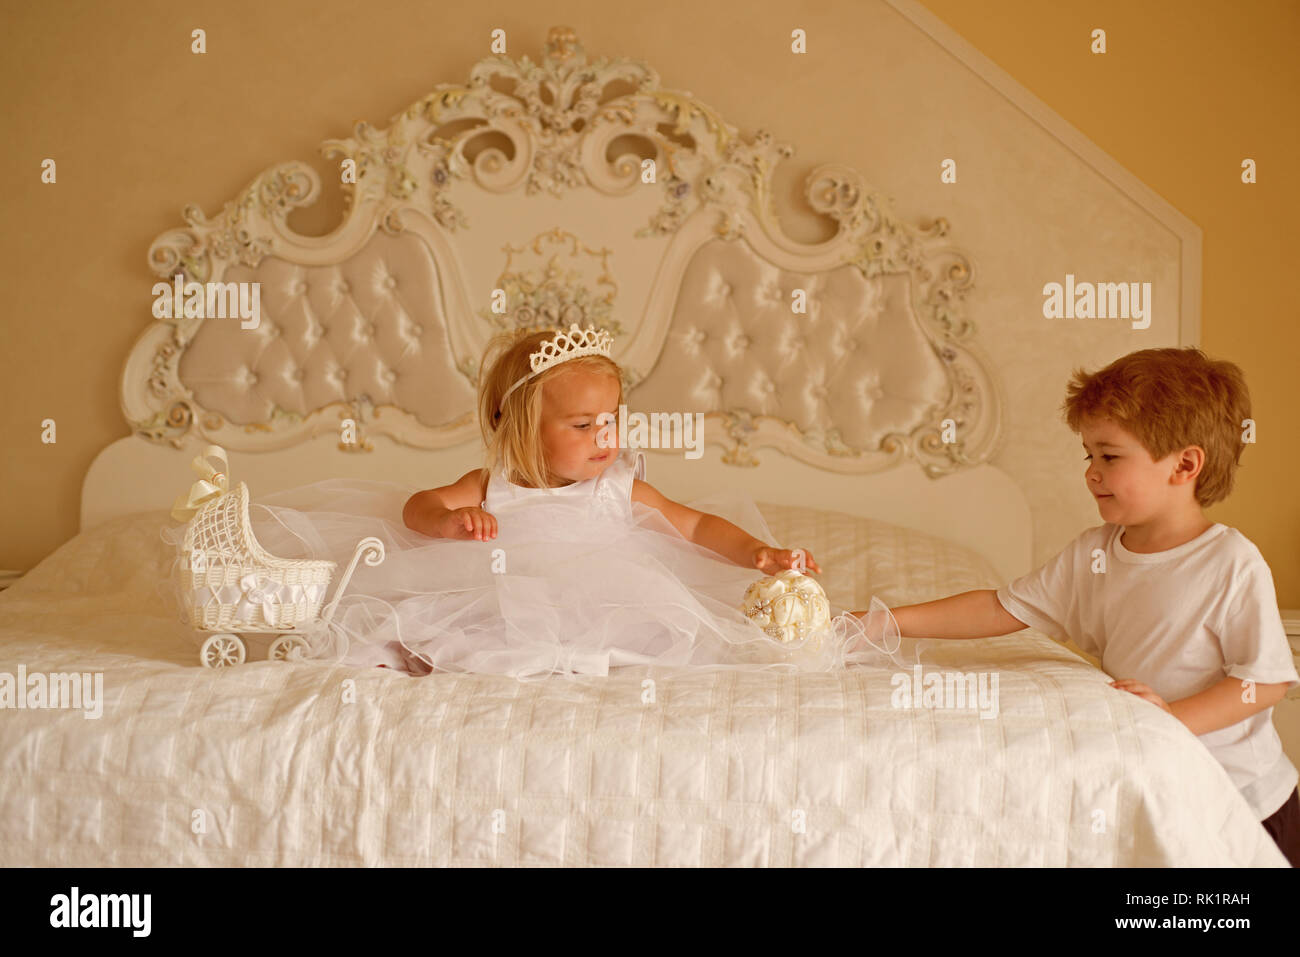 Make this hairstyle a standout. Little flower girl wear hair tiara. Page  boy with blonde hairstyle hold wedding bunch. Little children ready for  Stock Photo - Alamy